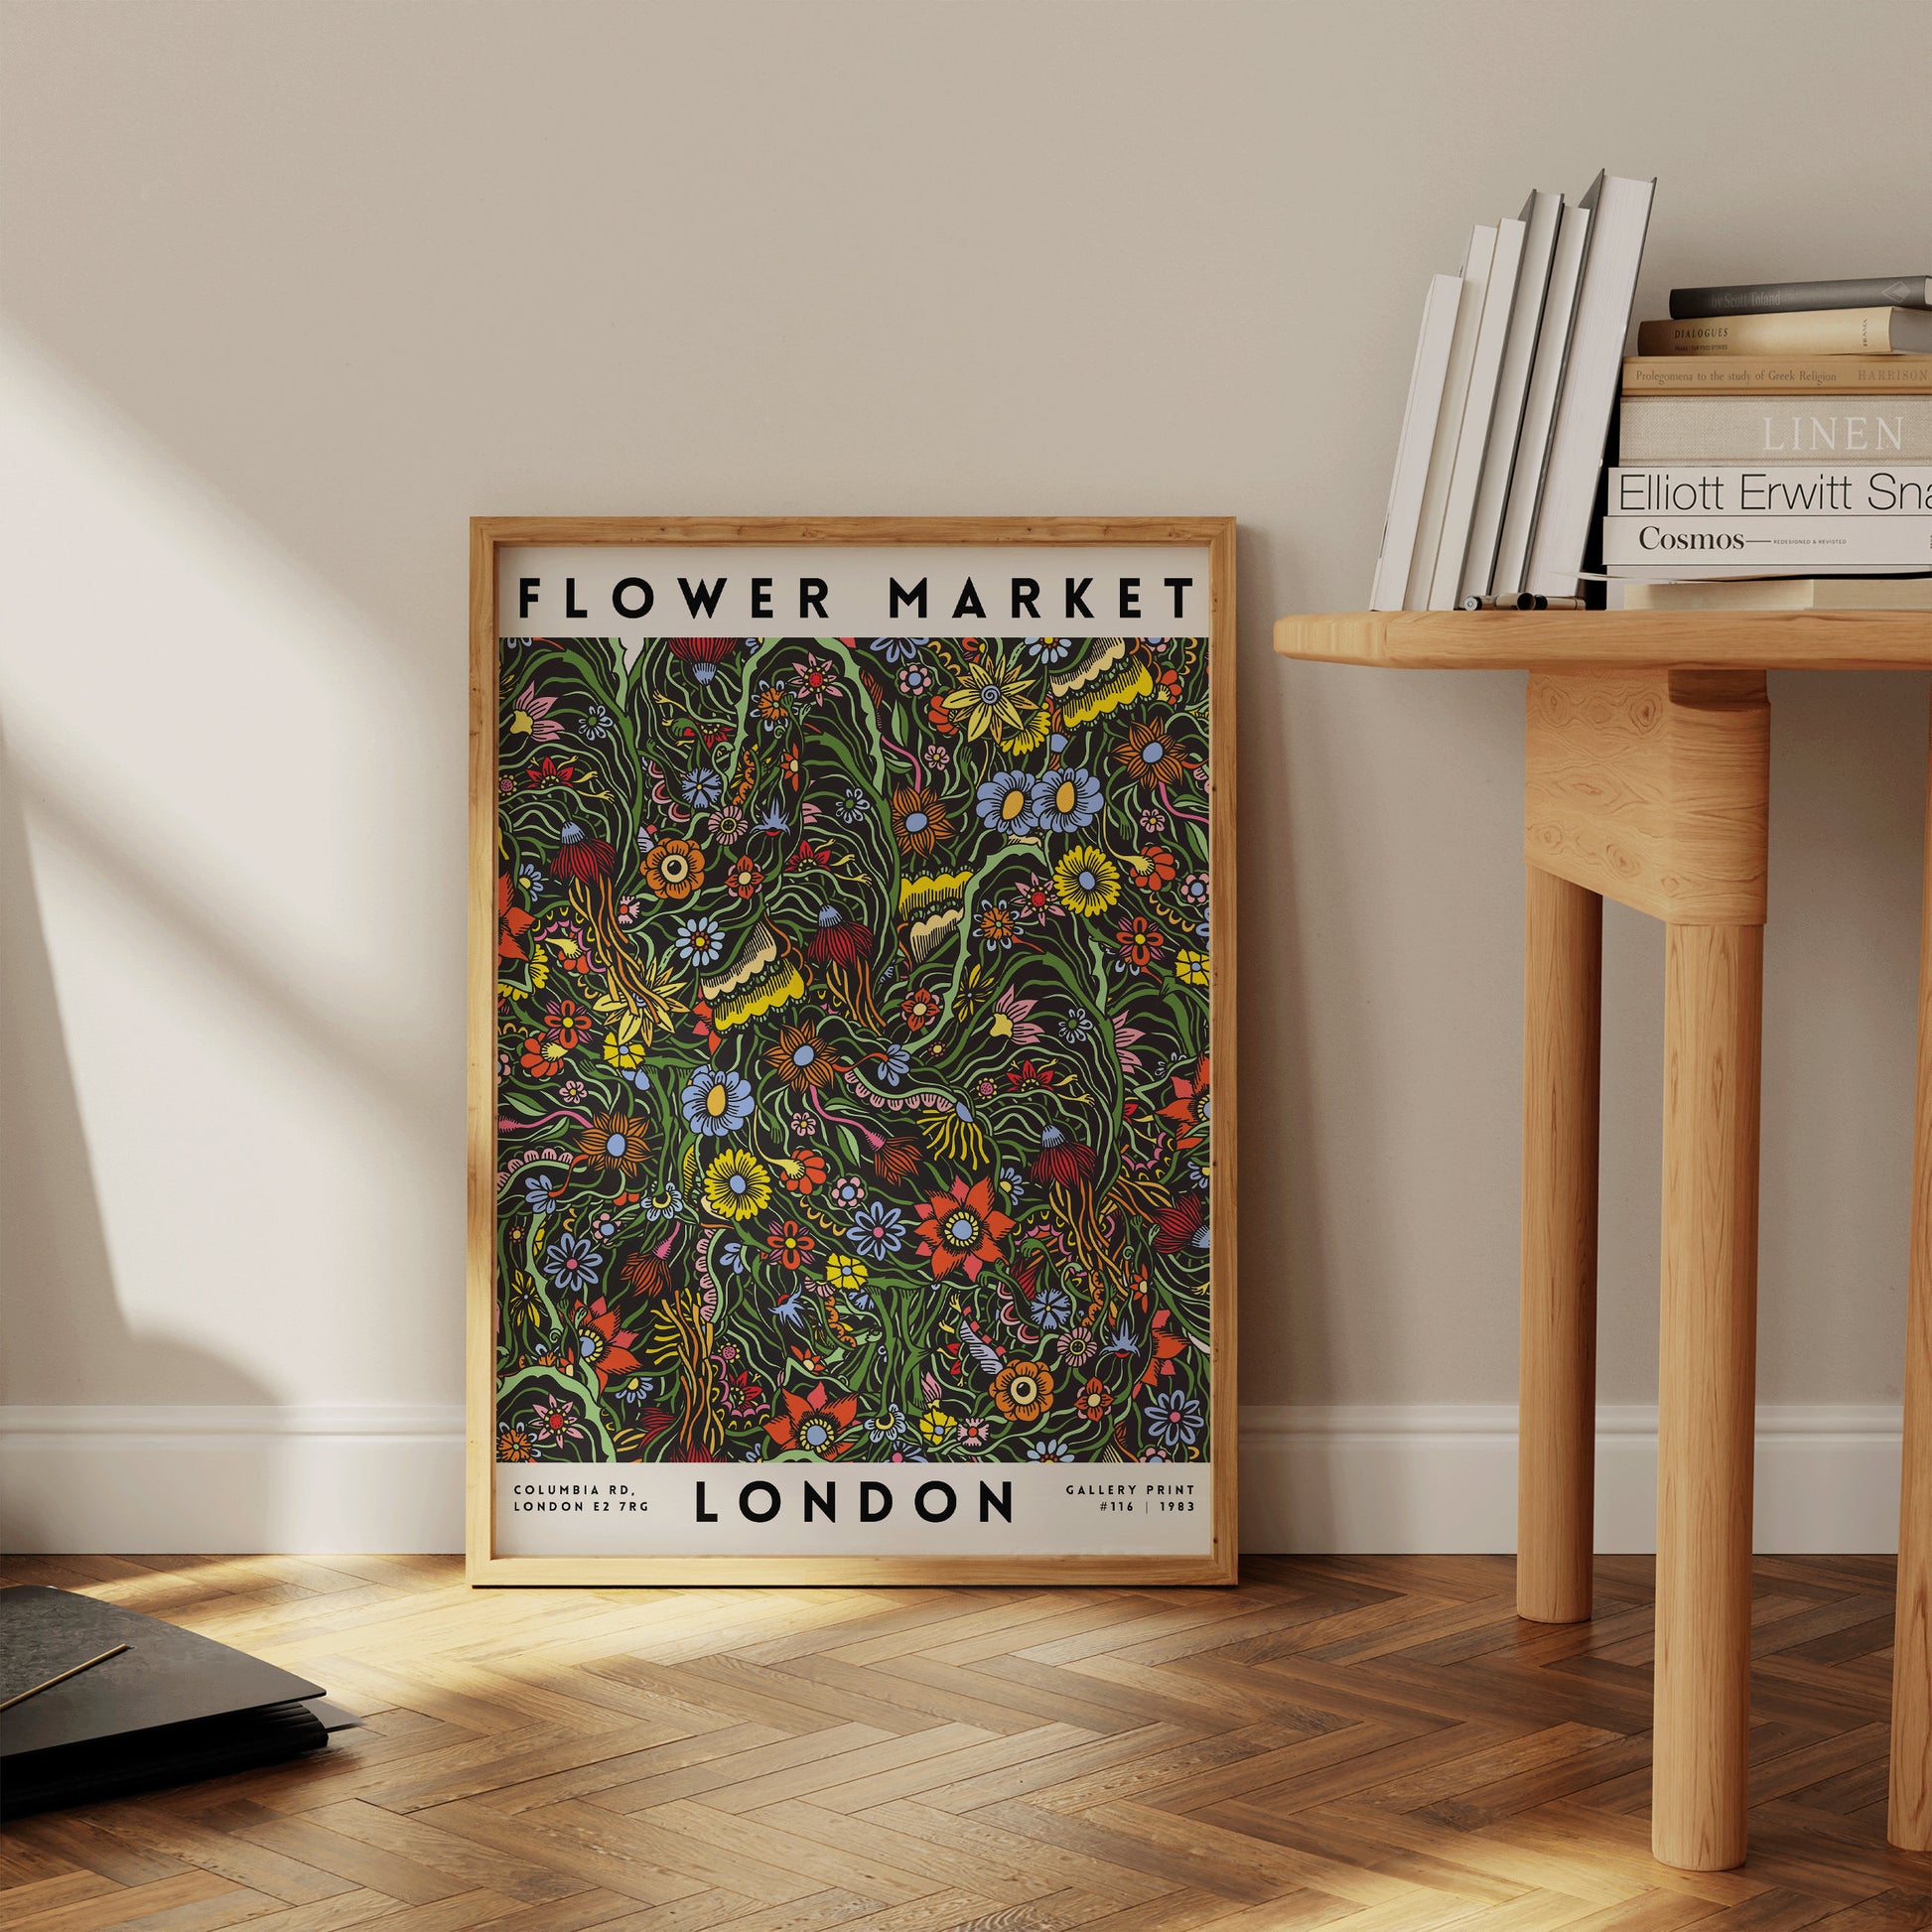 Framed Flower Market London Print Museum Exhibition Poster Botanical Floral Decor Poster Ready to hang Home Office Decor Gift for Her